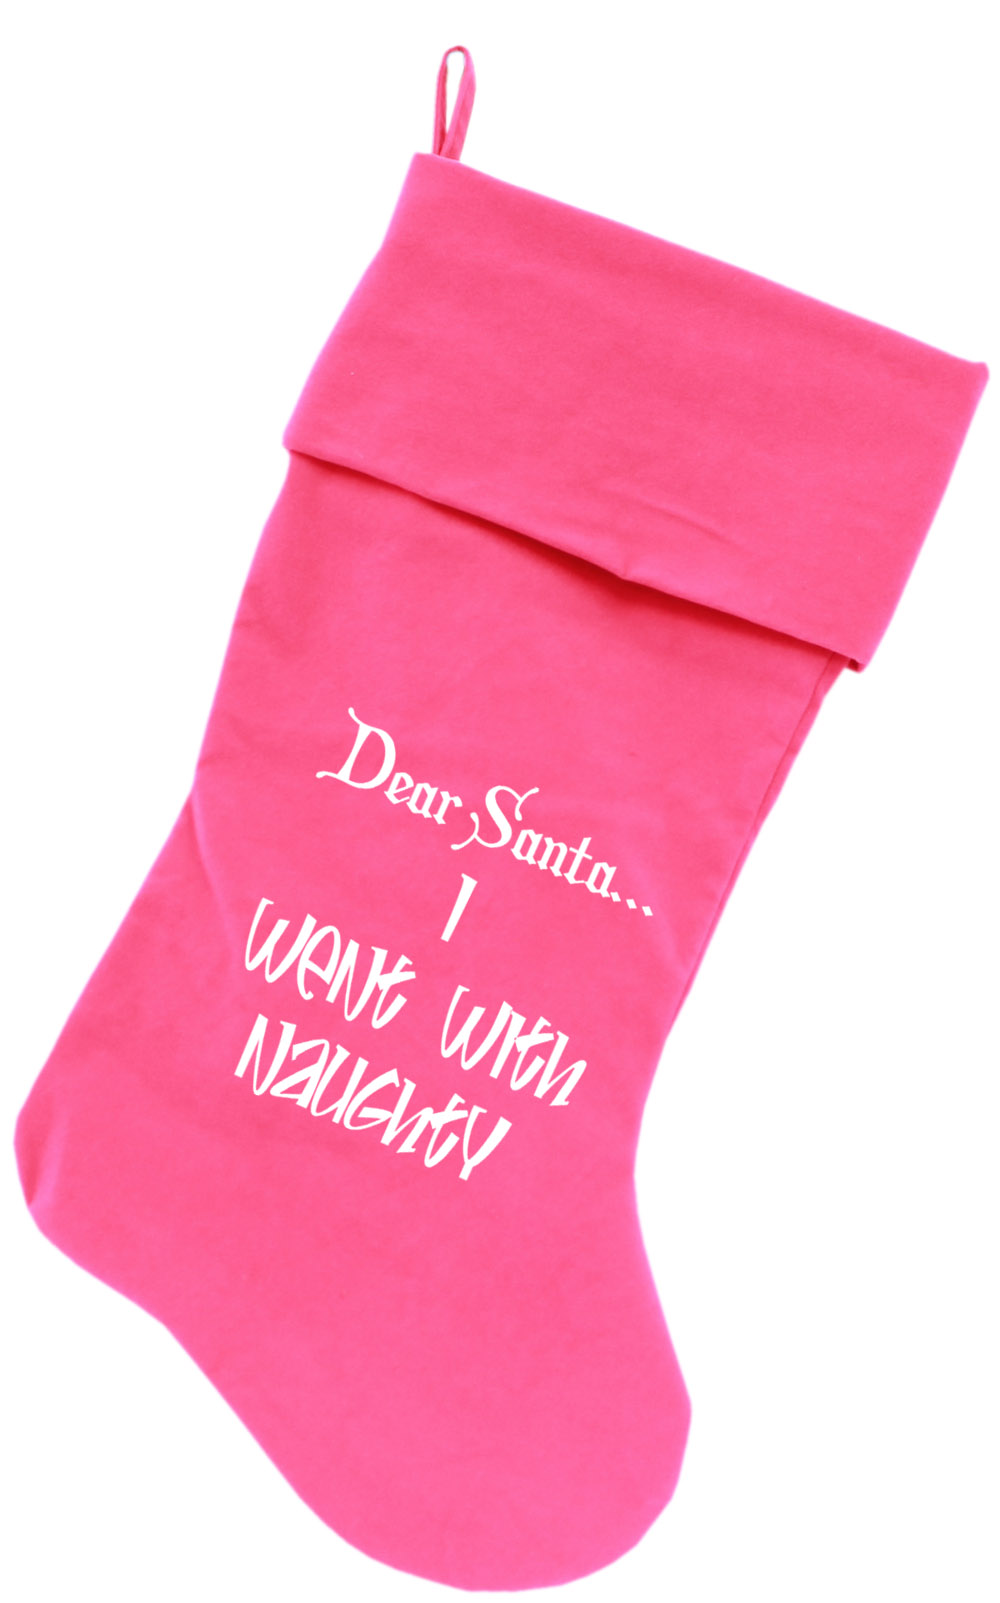 Went with Naughty Screen Print 18 inch Velvet Christmas Stocking Pink